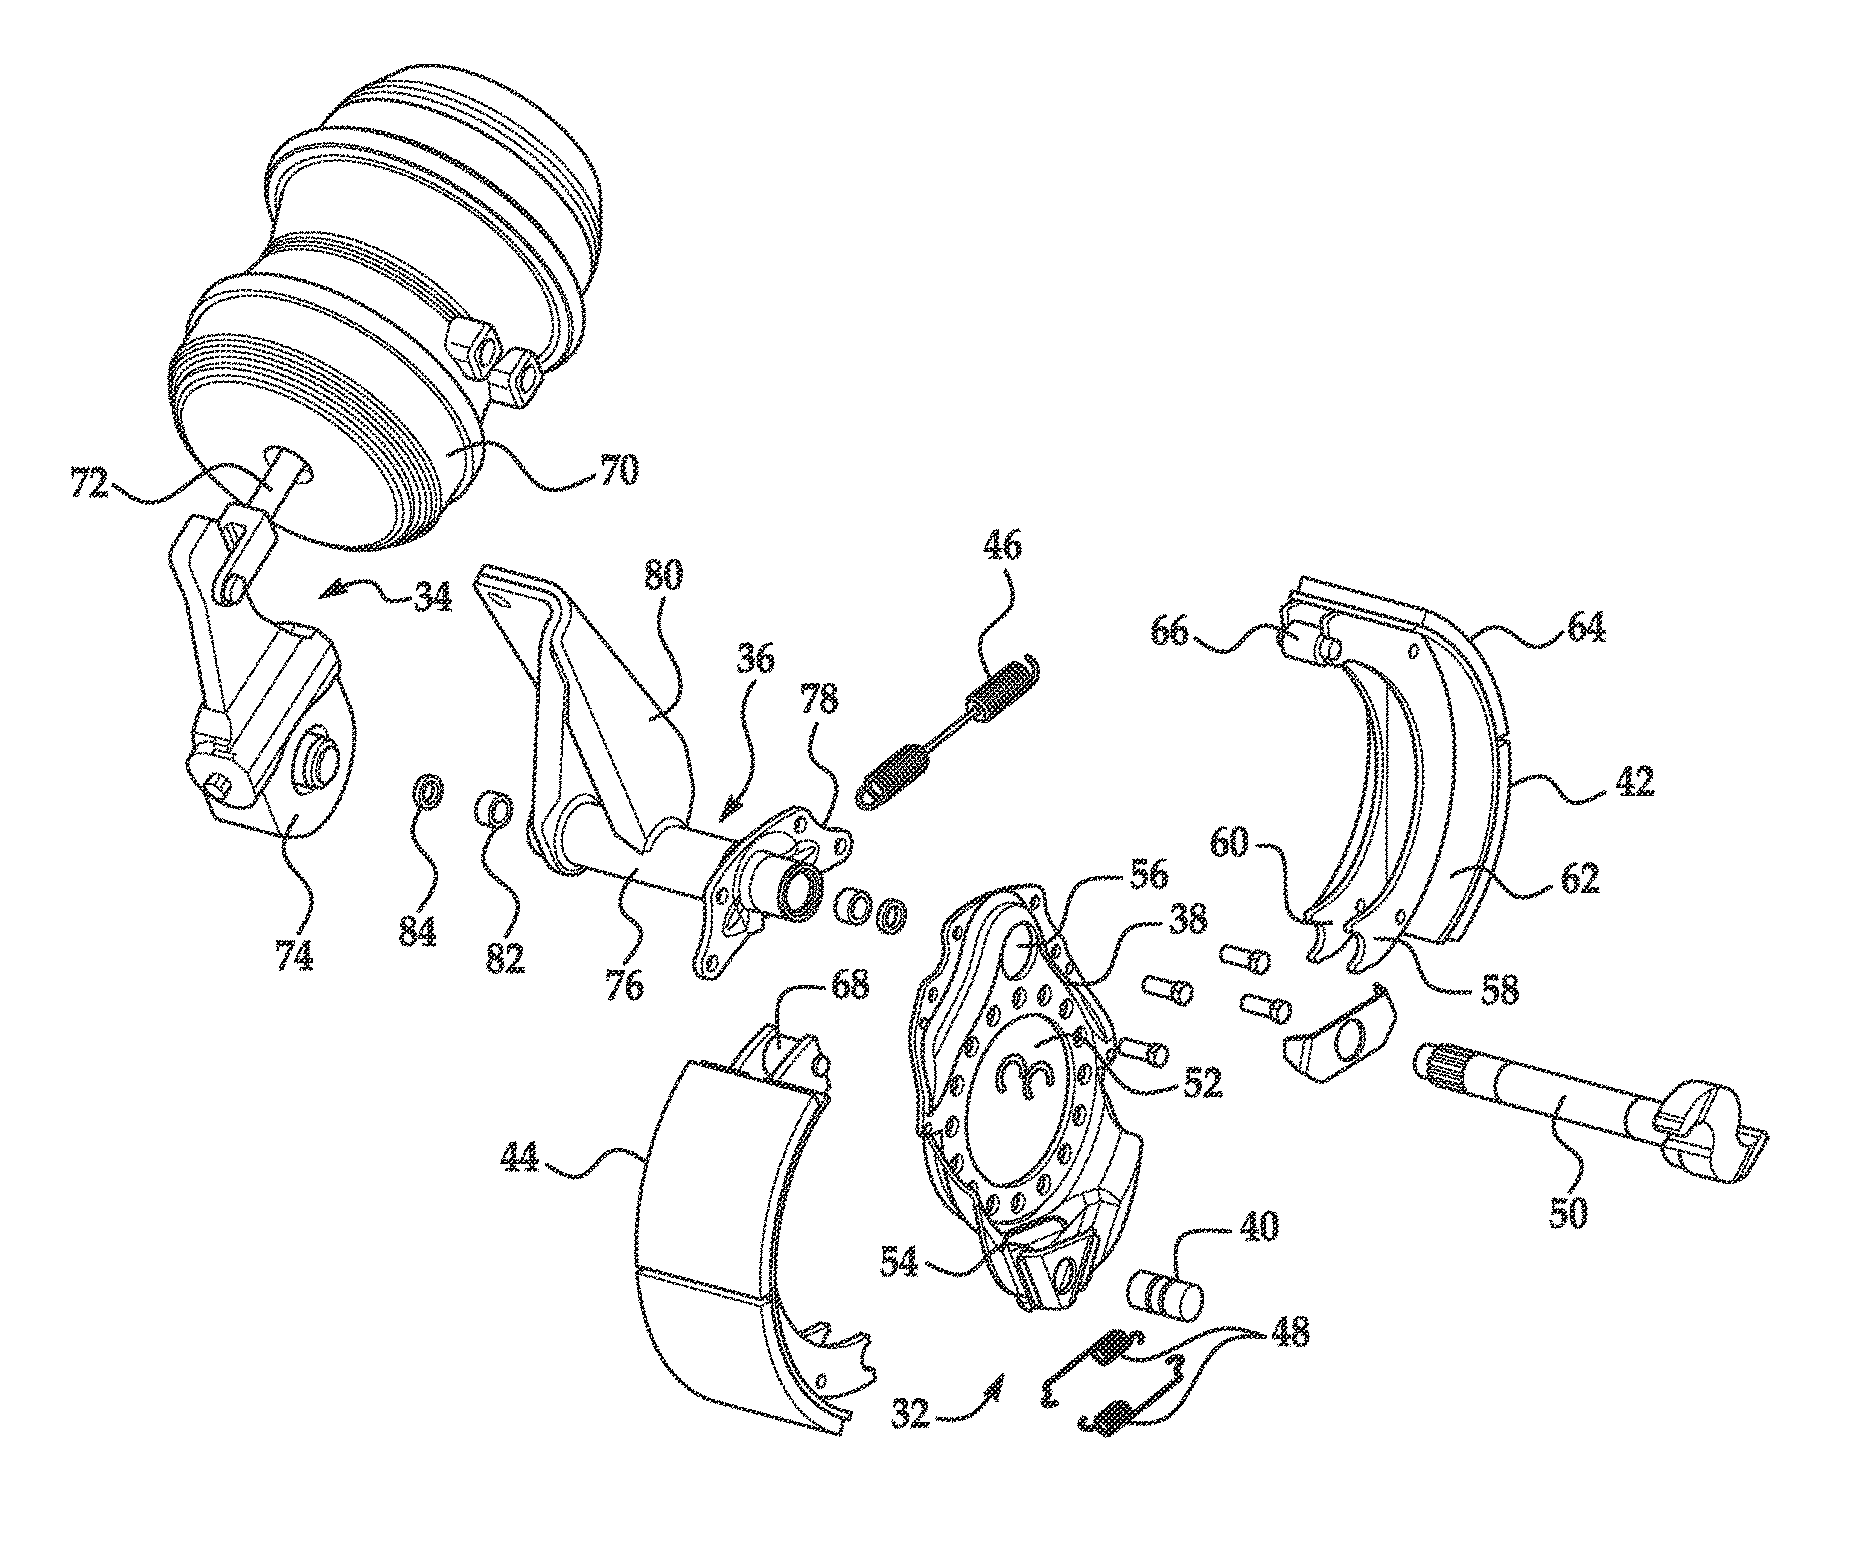 Rigid bracket assembly for mounting a brake assembly and brake actuator